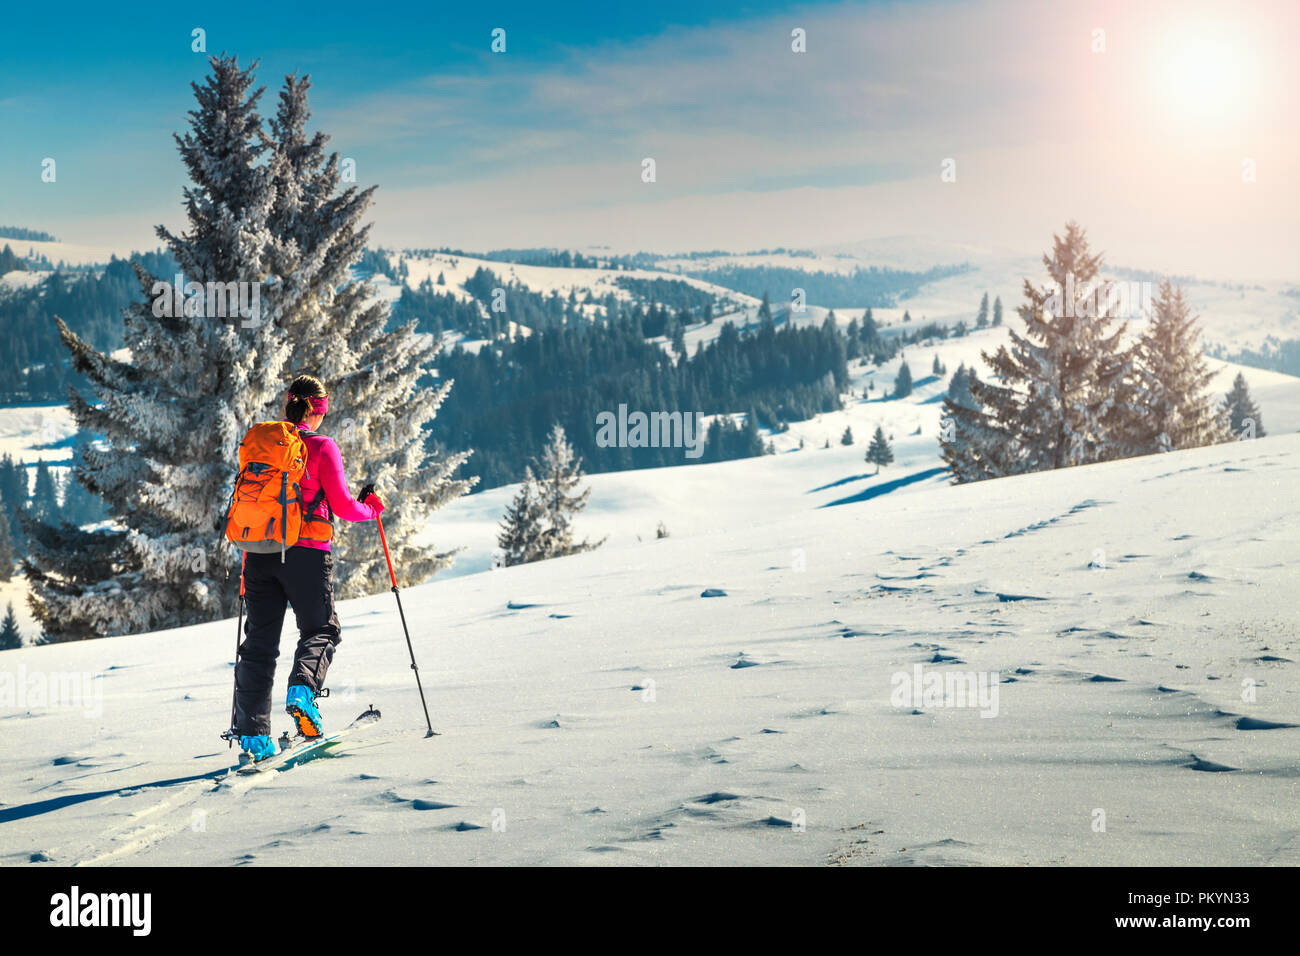 Ski touring in high alpine landscape with snowy trees. Adventure, winter activities, skitouring in spectacular mountains, Transylvania,Carpathians,  R Stock Photo